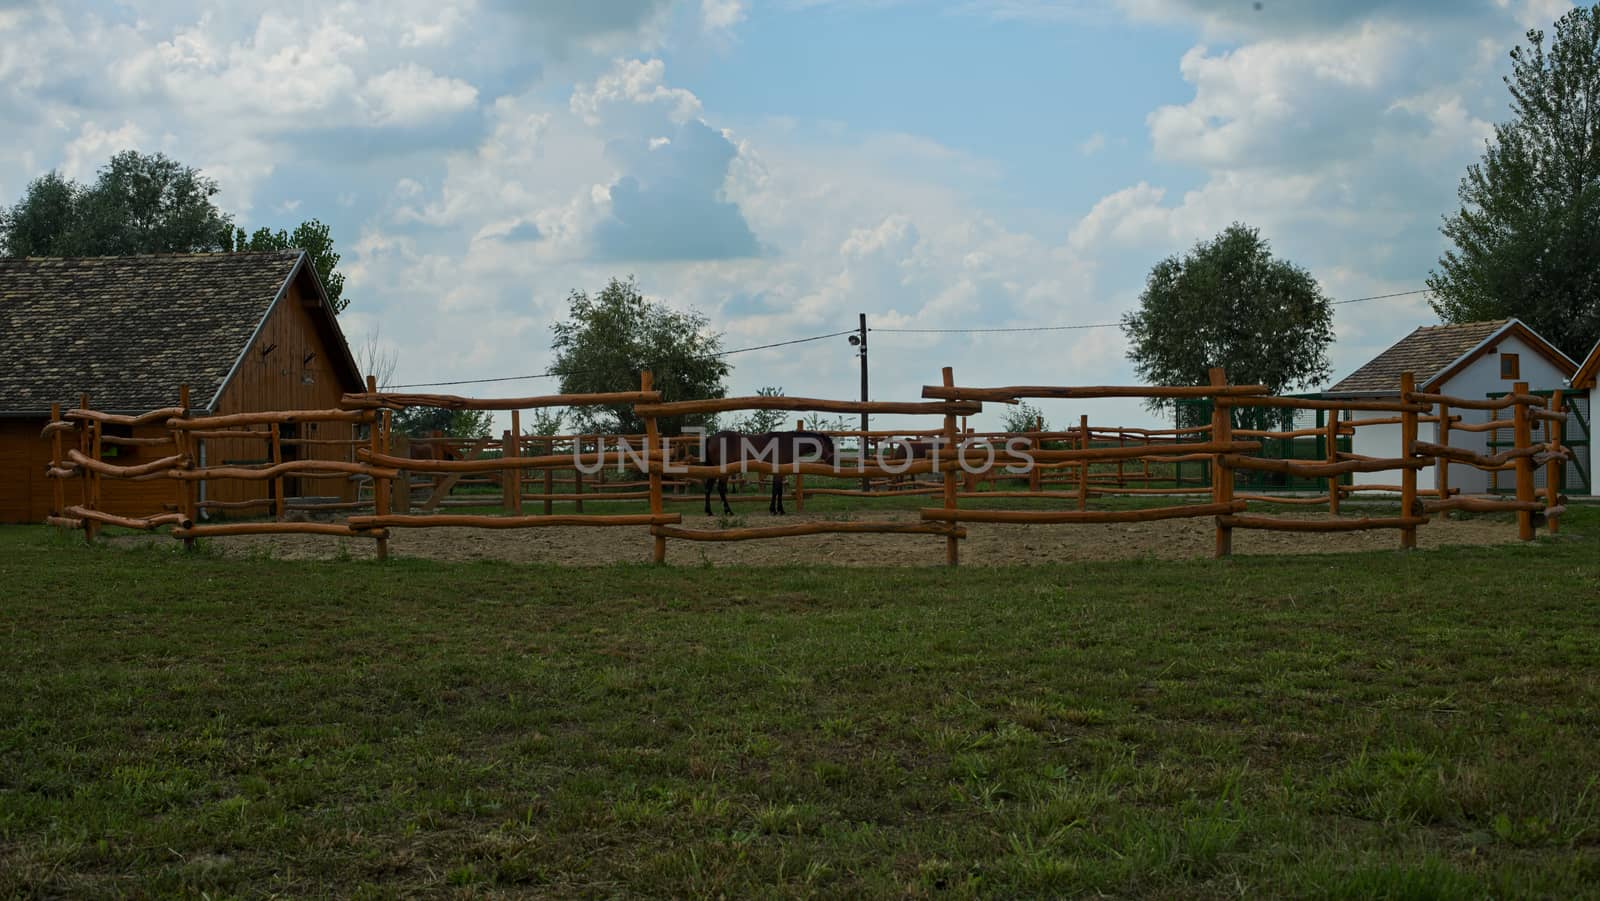 Fenced area with a brown horse inside it